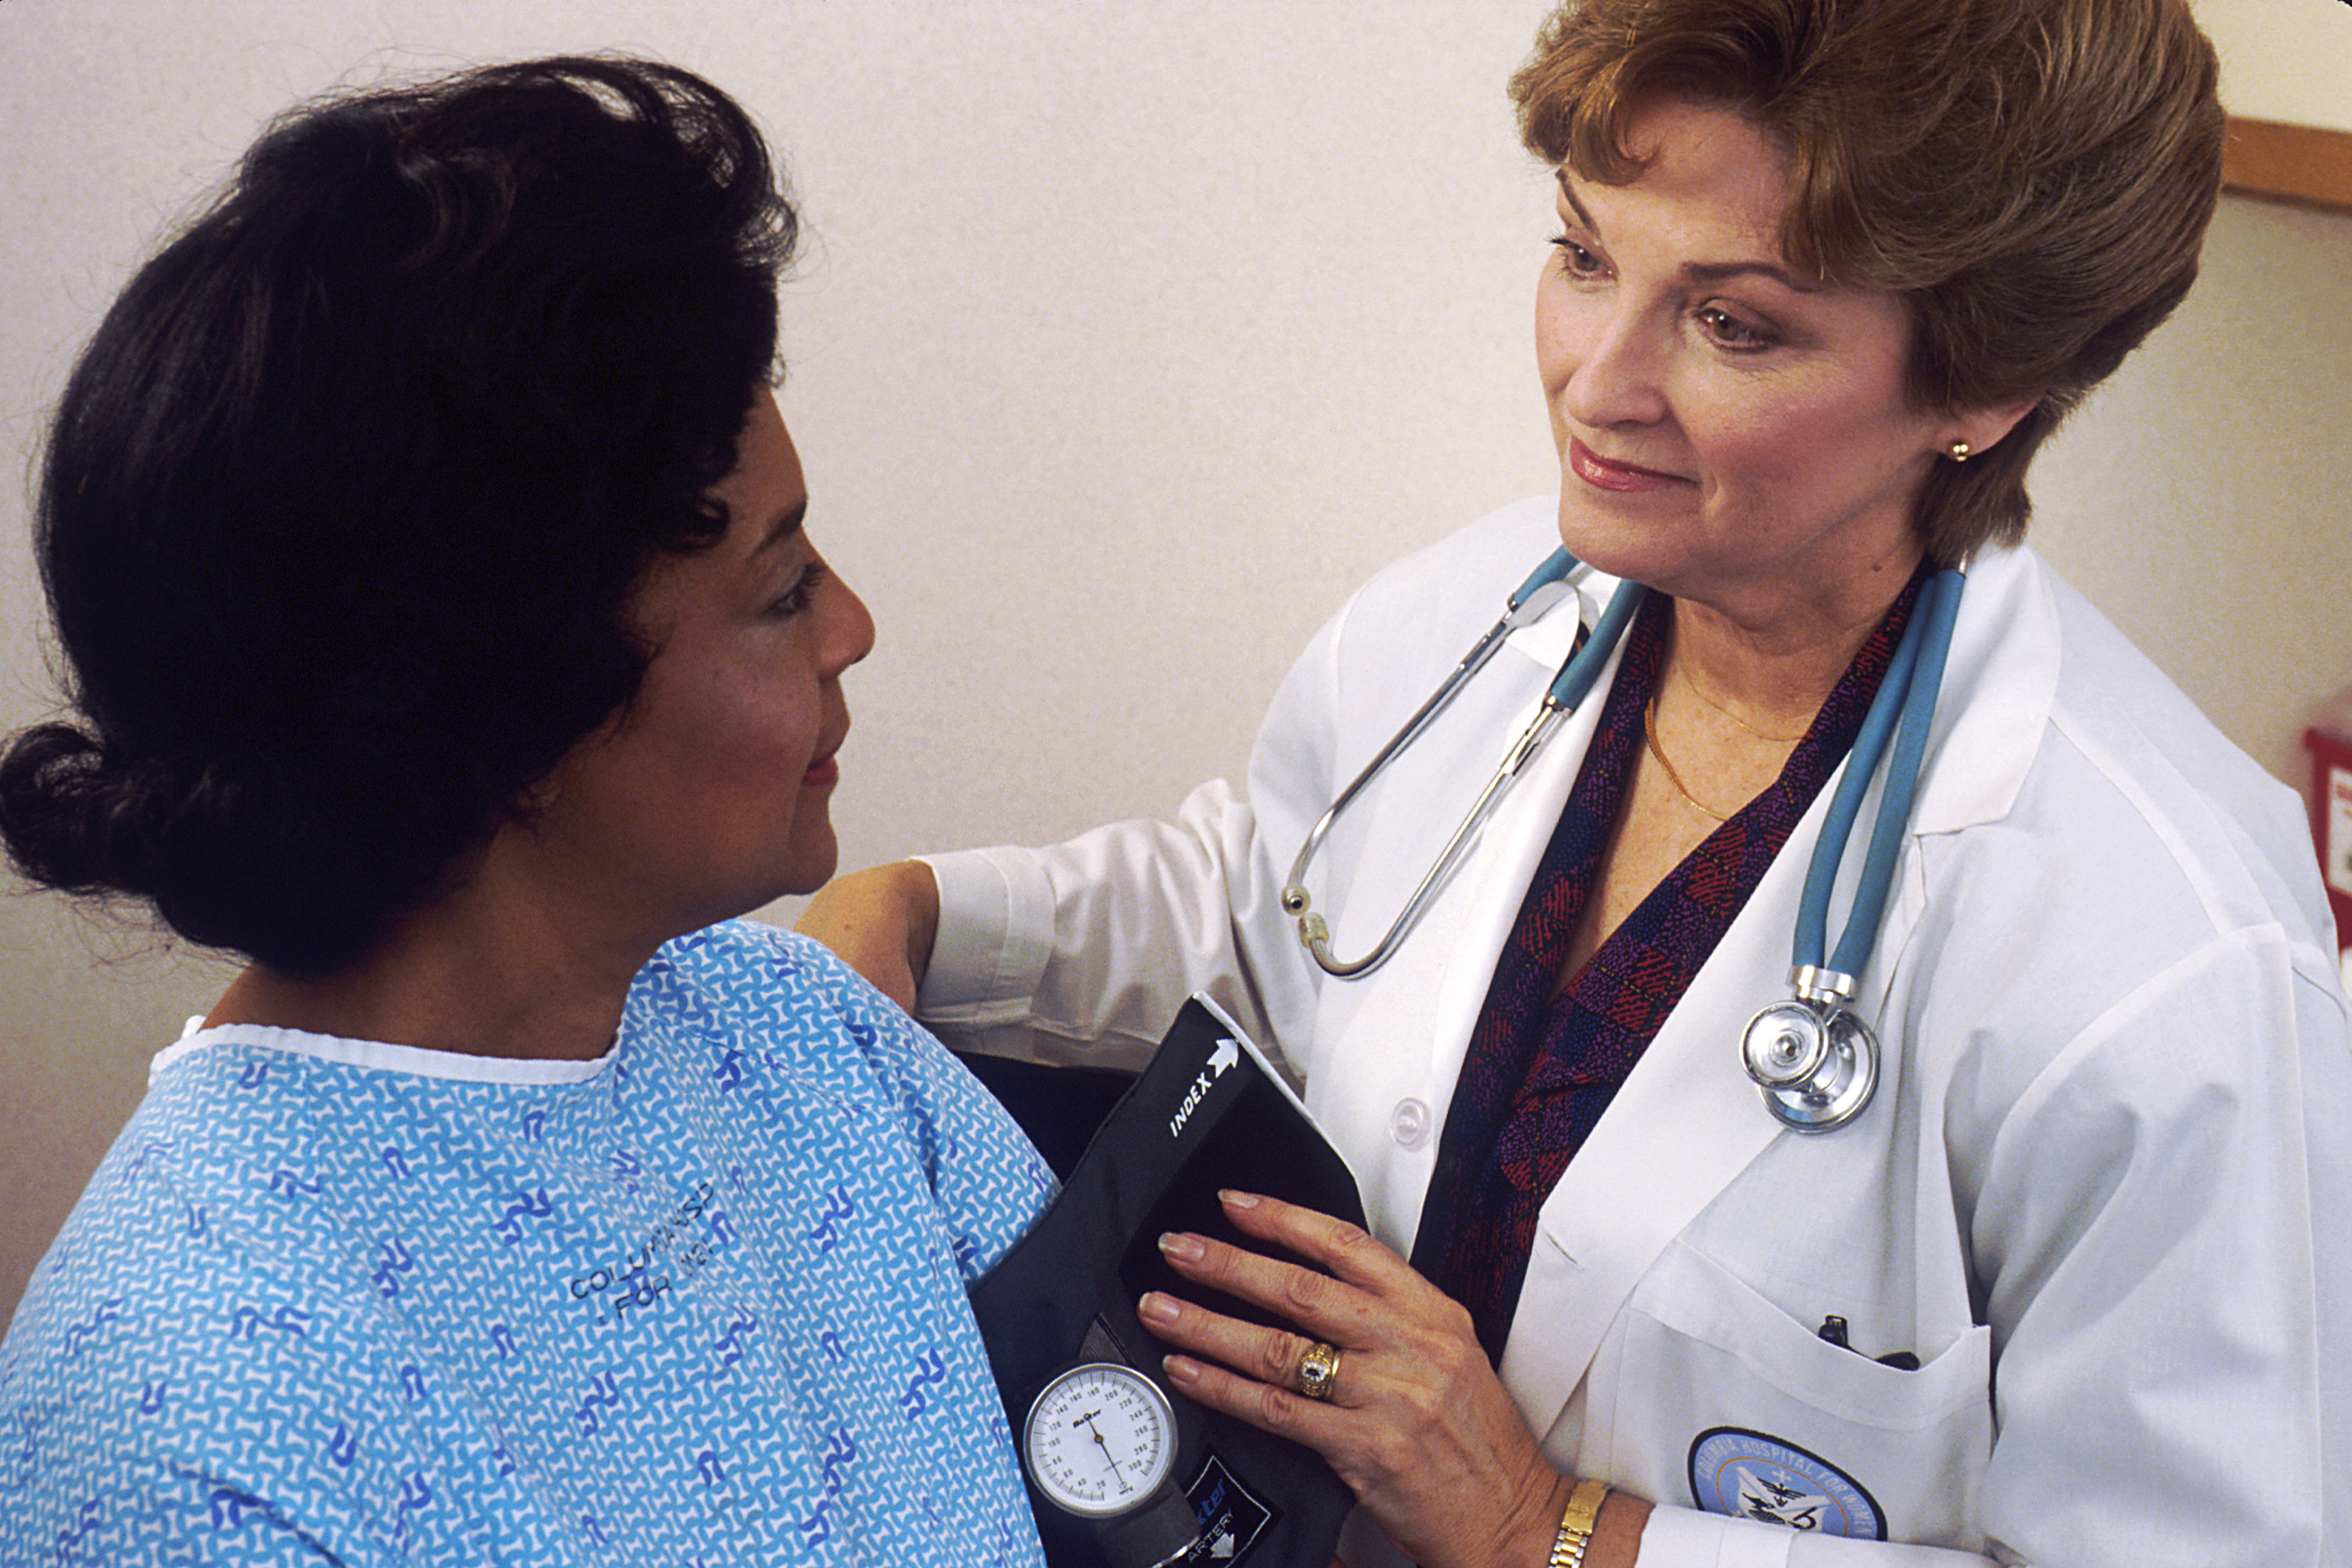 Doctor takes blood pressure - 4 Healthcare Careers That Make a Real Impact in Patients' Lives